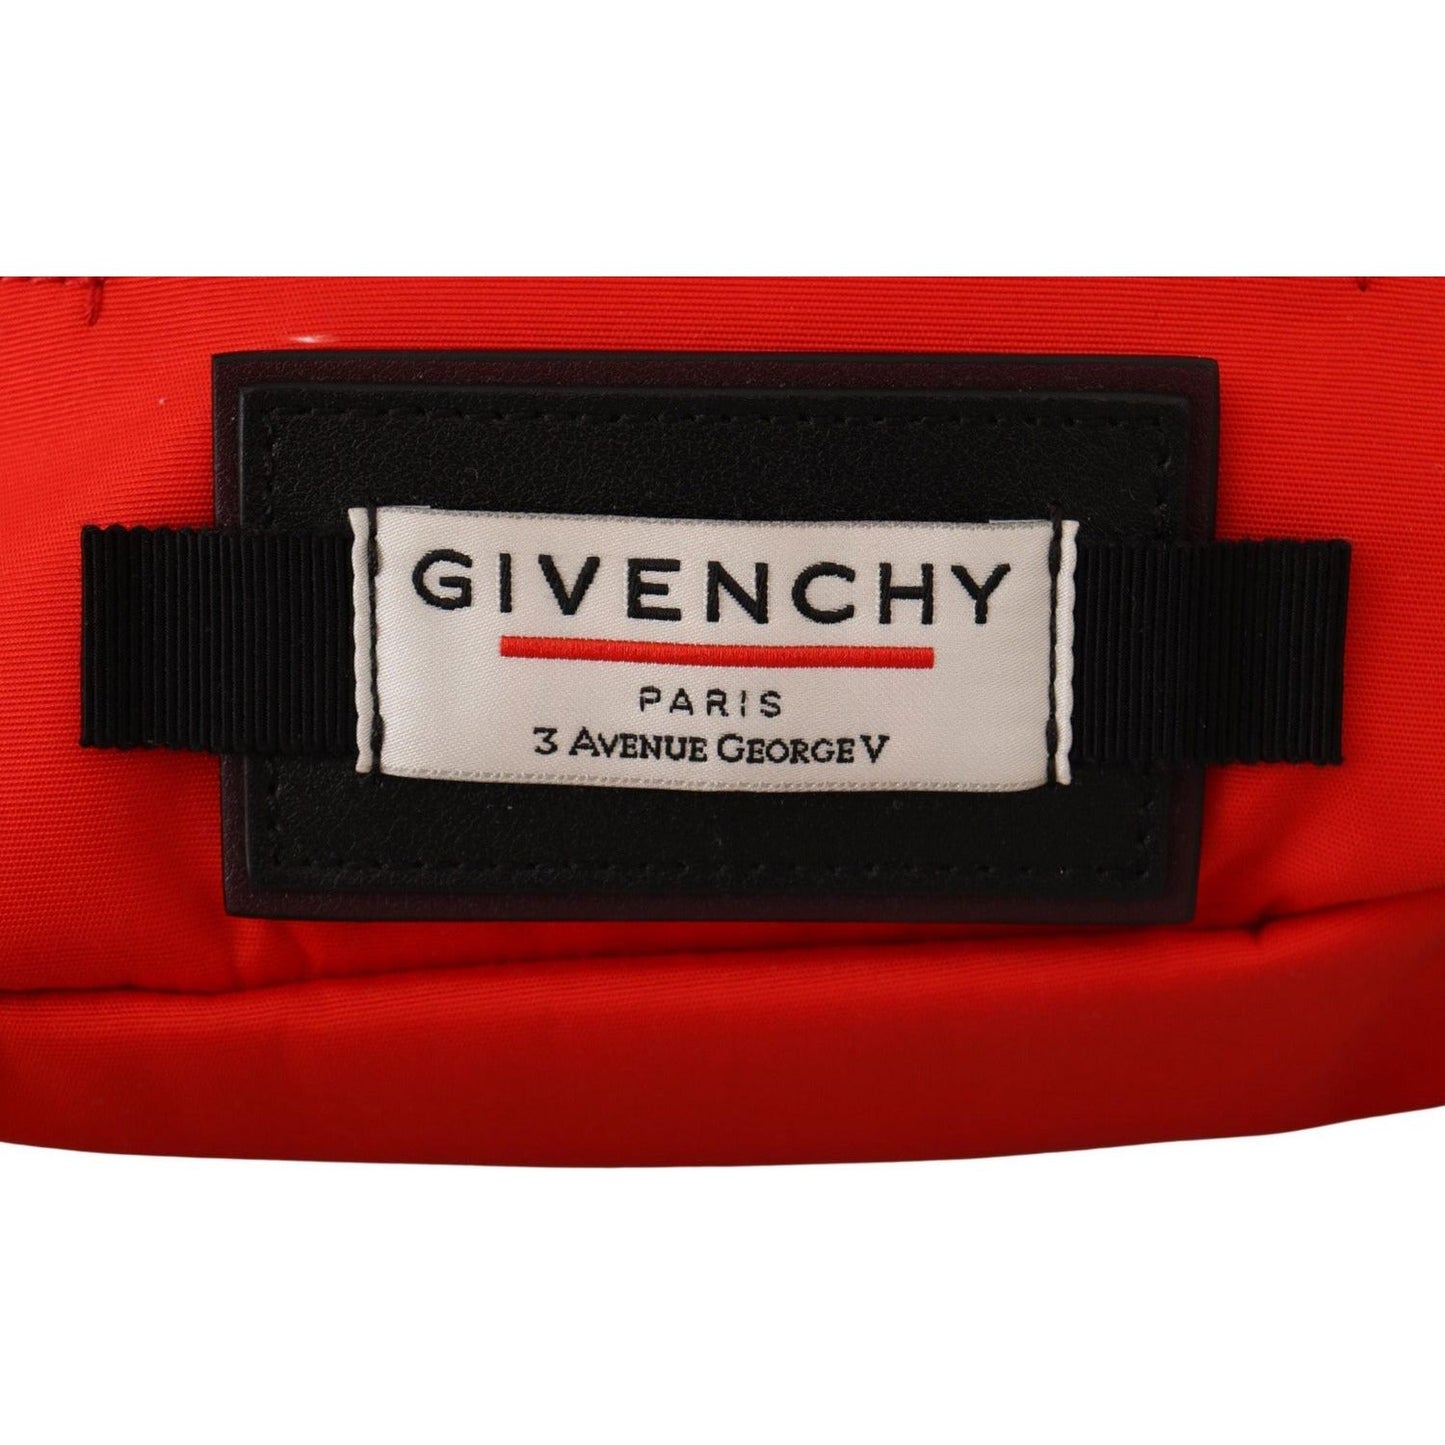 Givenchy Elegant Large Bum Belt Bag in Red and Black red-polyamide-downtown-large-bum-belt-bag BELT BAG IMG_7641-scaled-1a9b0c20-a63.jpg